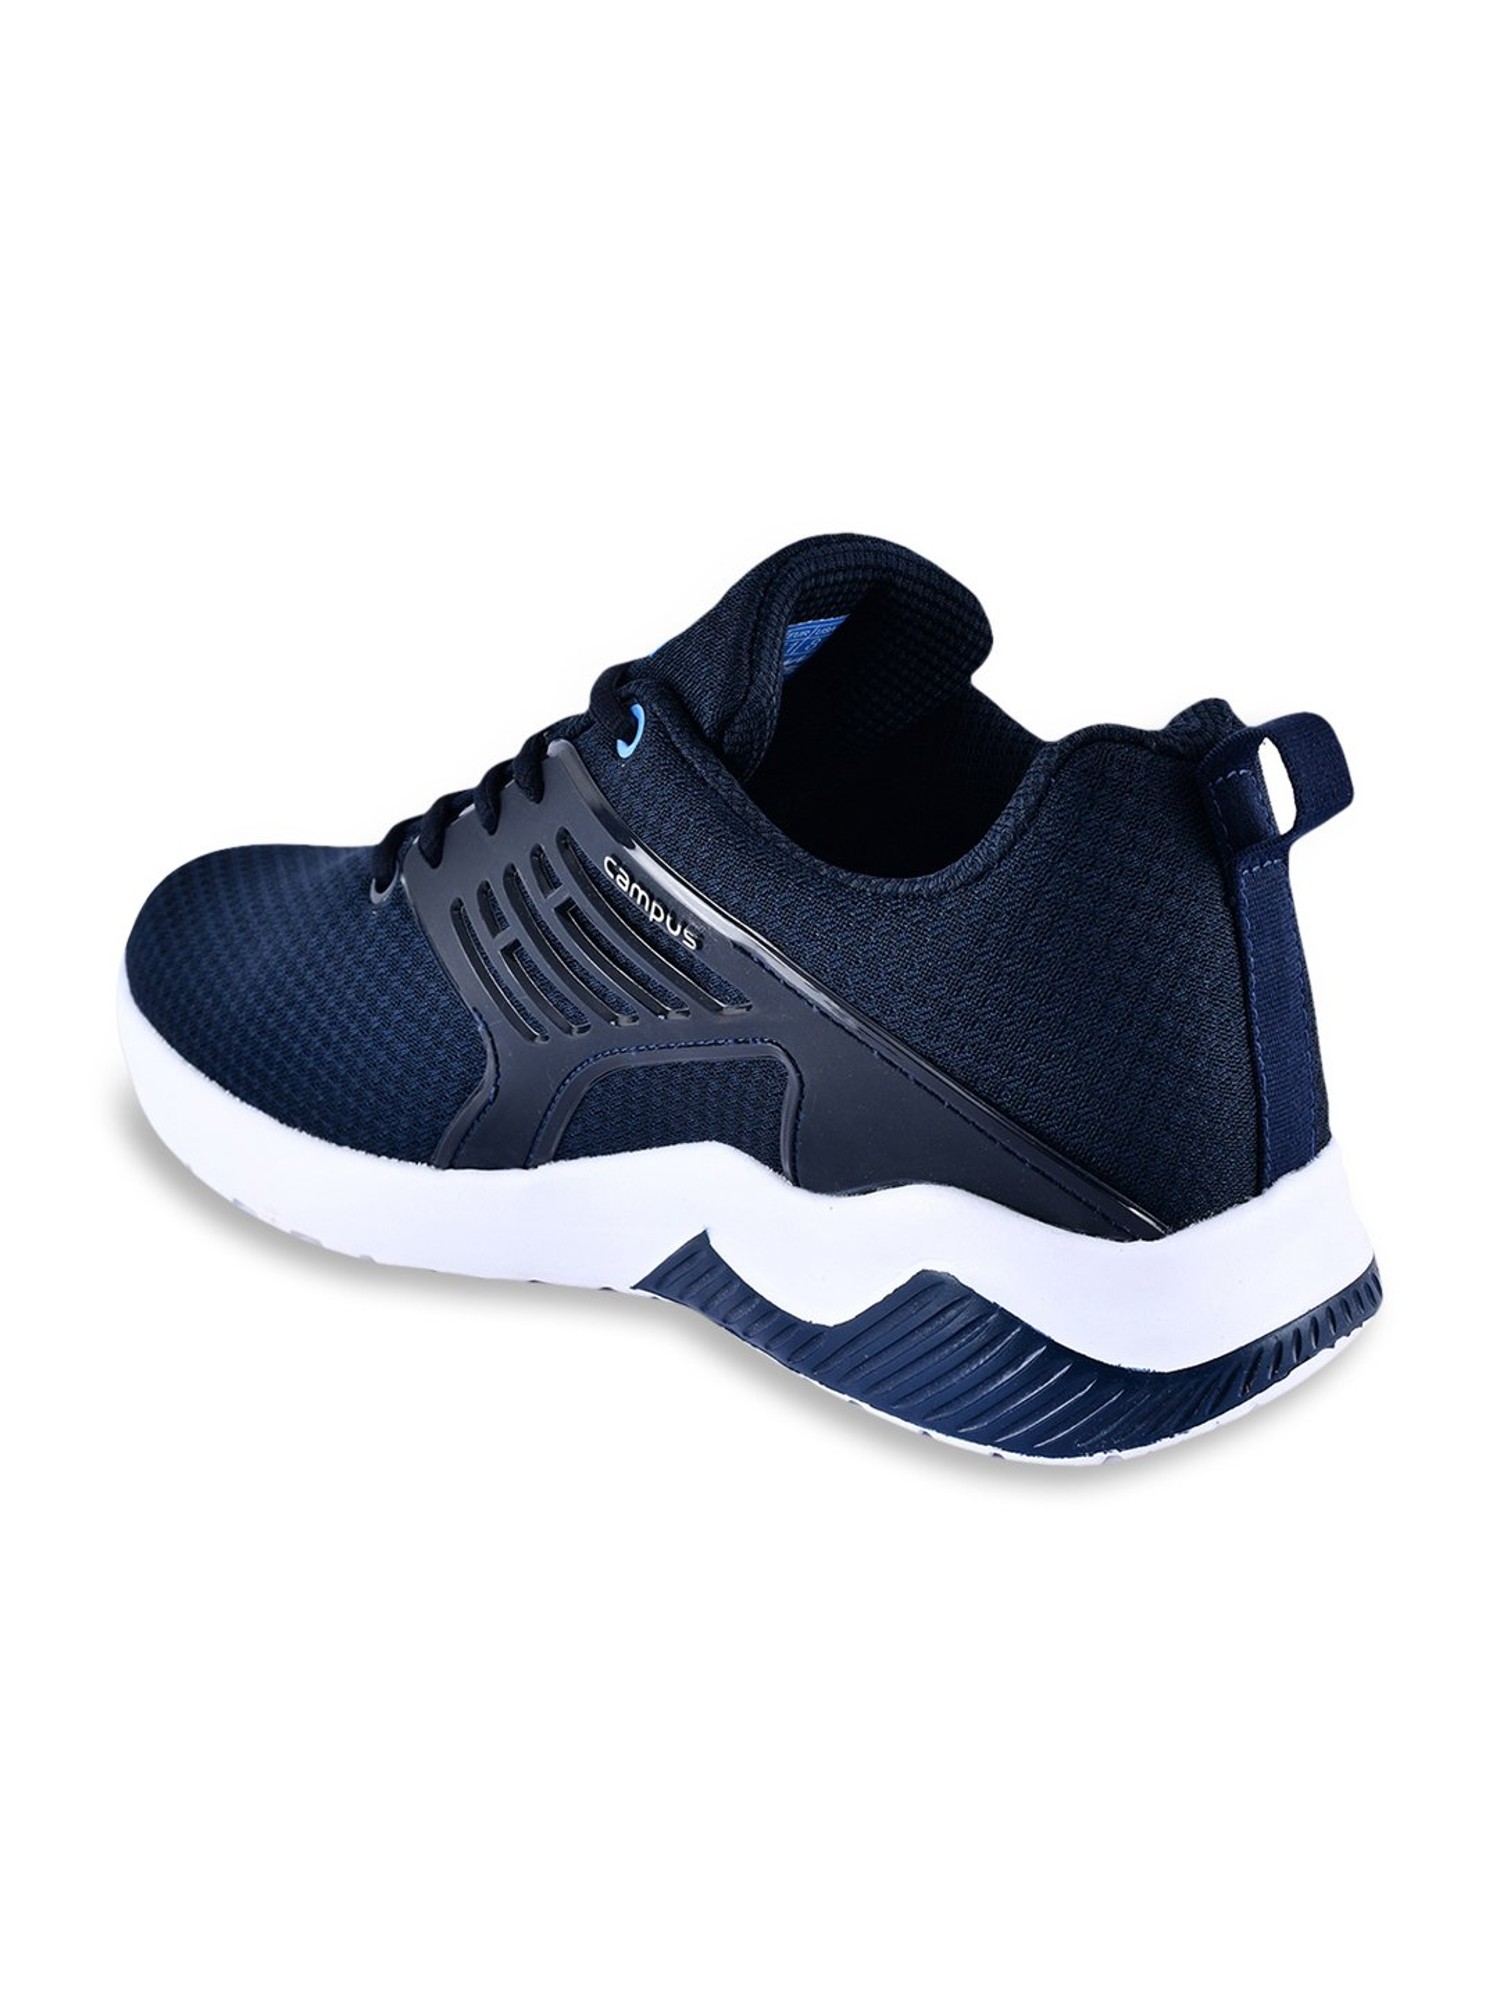 Campus Crysta Navy Running Shoes from 